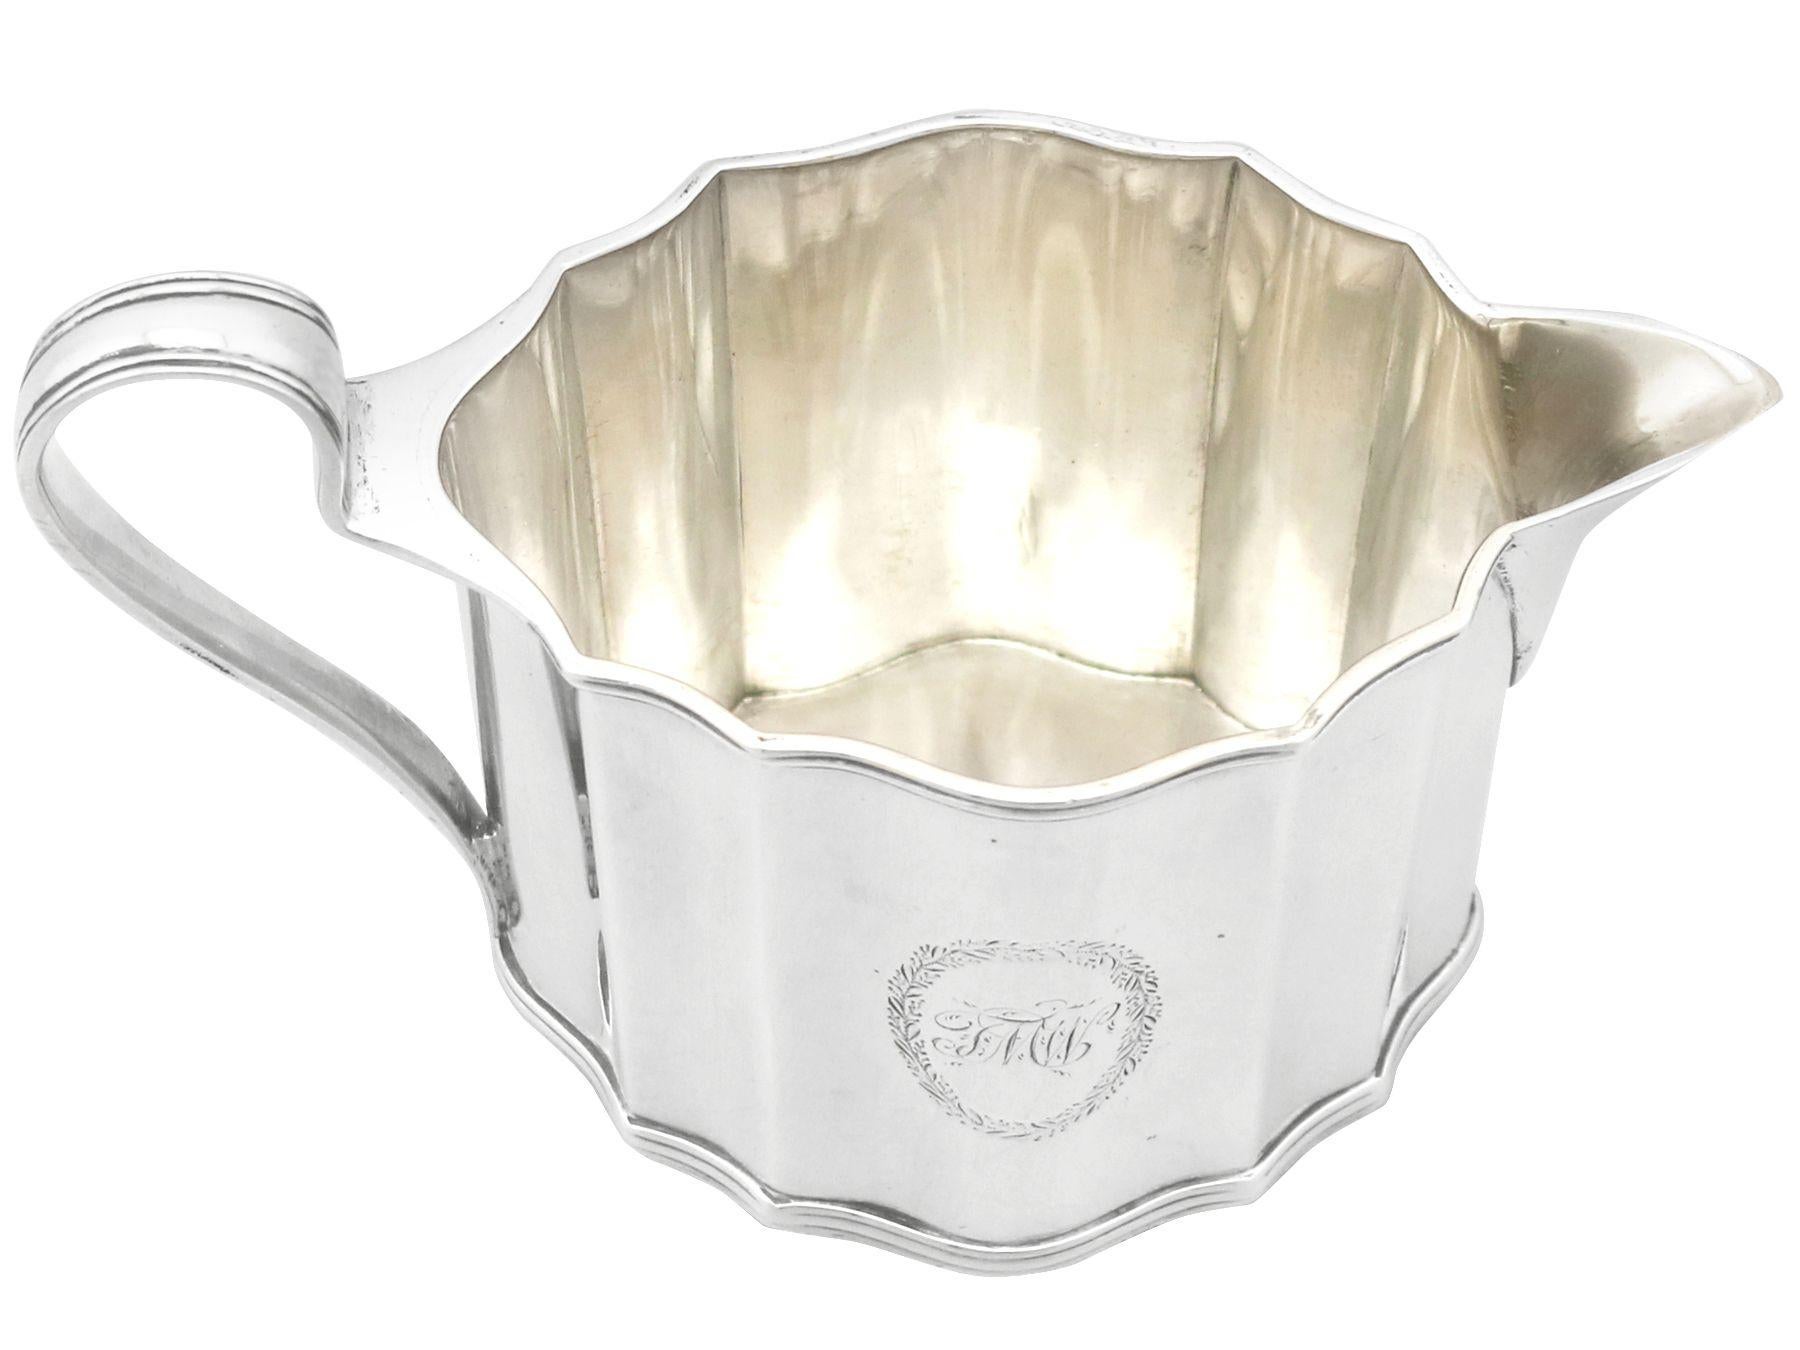 A fine and impressive, large antique George III English sterling silver cream jug made by Henry Chawner, an addition to our Georgian silver teaware collection.

This fine antique George III sterling silver cream jug has an oval shaped form.

The